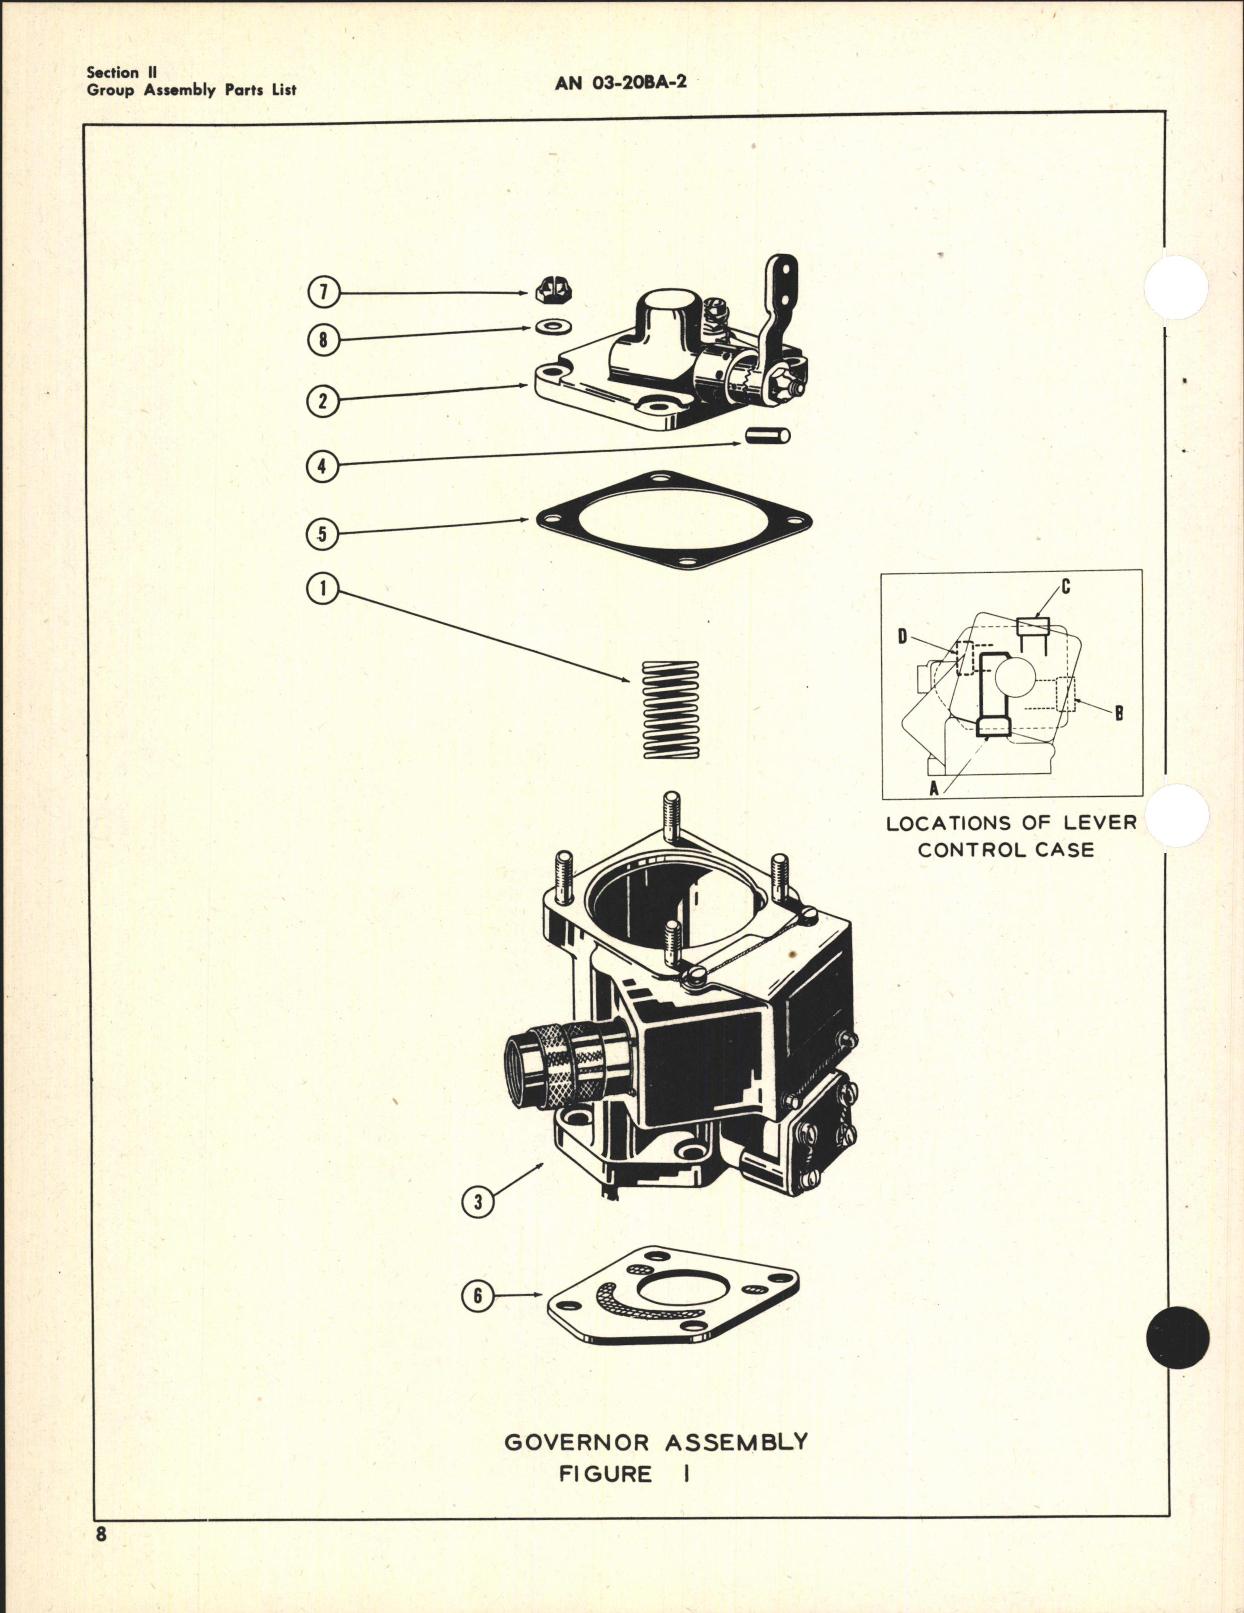 Sample page 8 from AirCorps Library document: Parts Catalog for Electric Propeller Control System